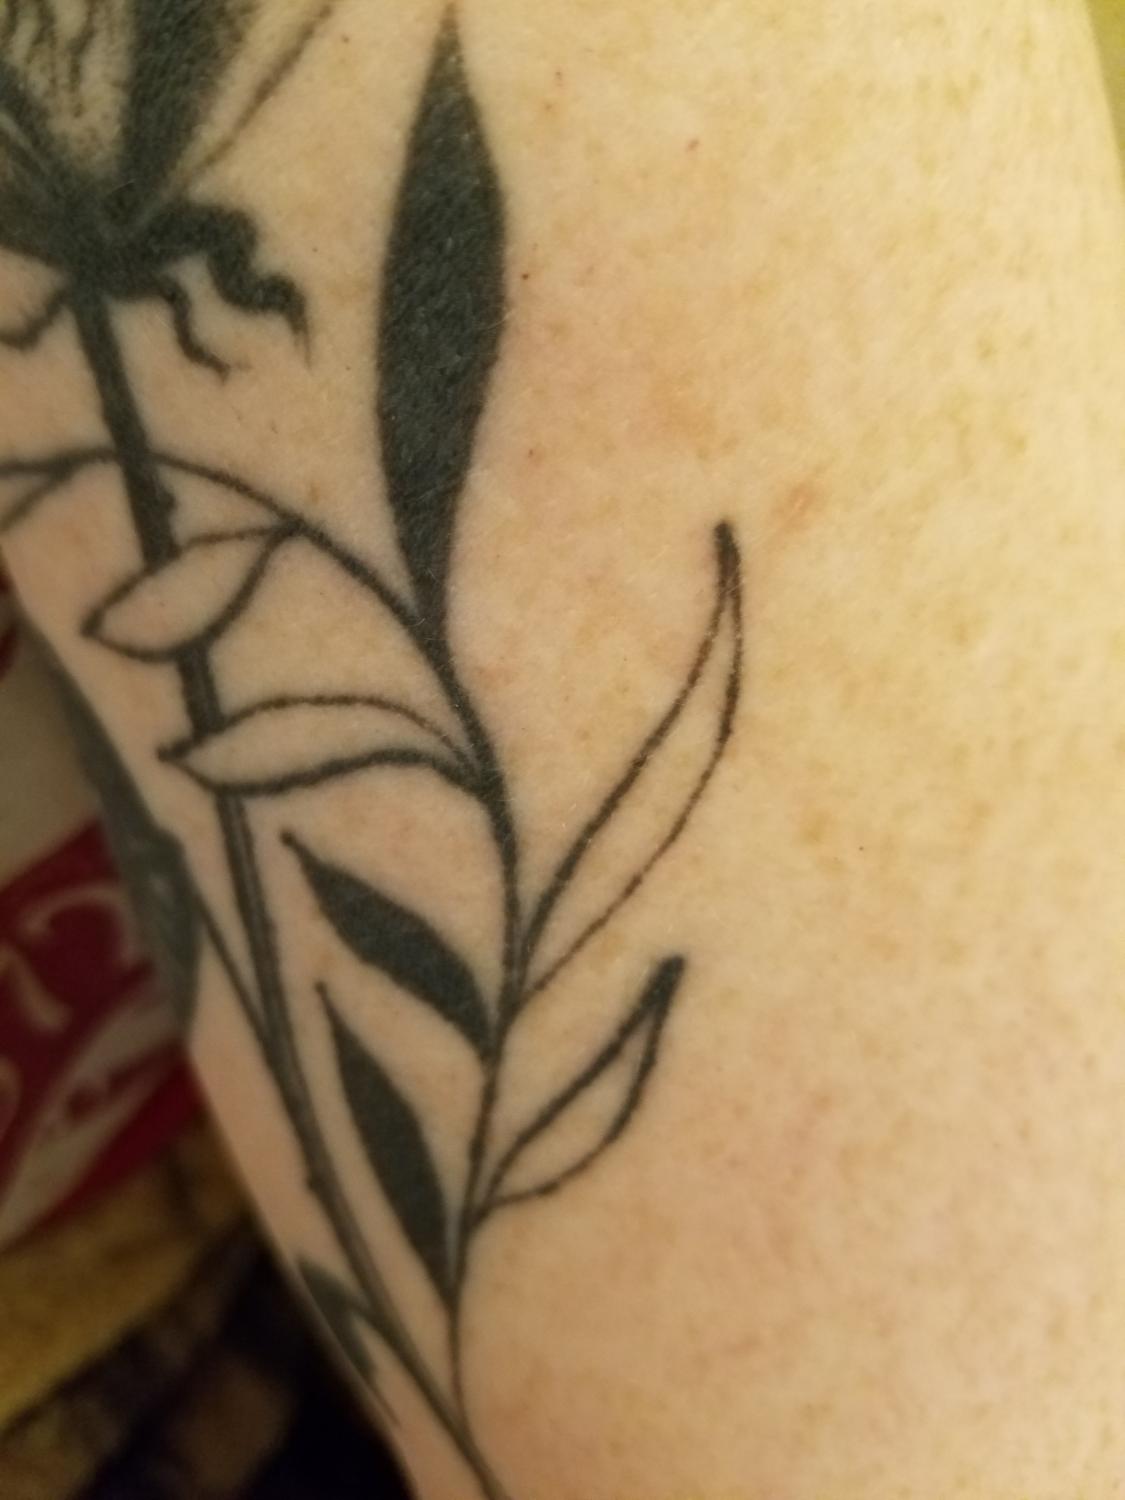 First and new tattoo with lost ink and uneven Is it fixable   Initiation  Last Sparrow Tattoo